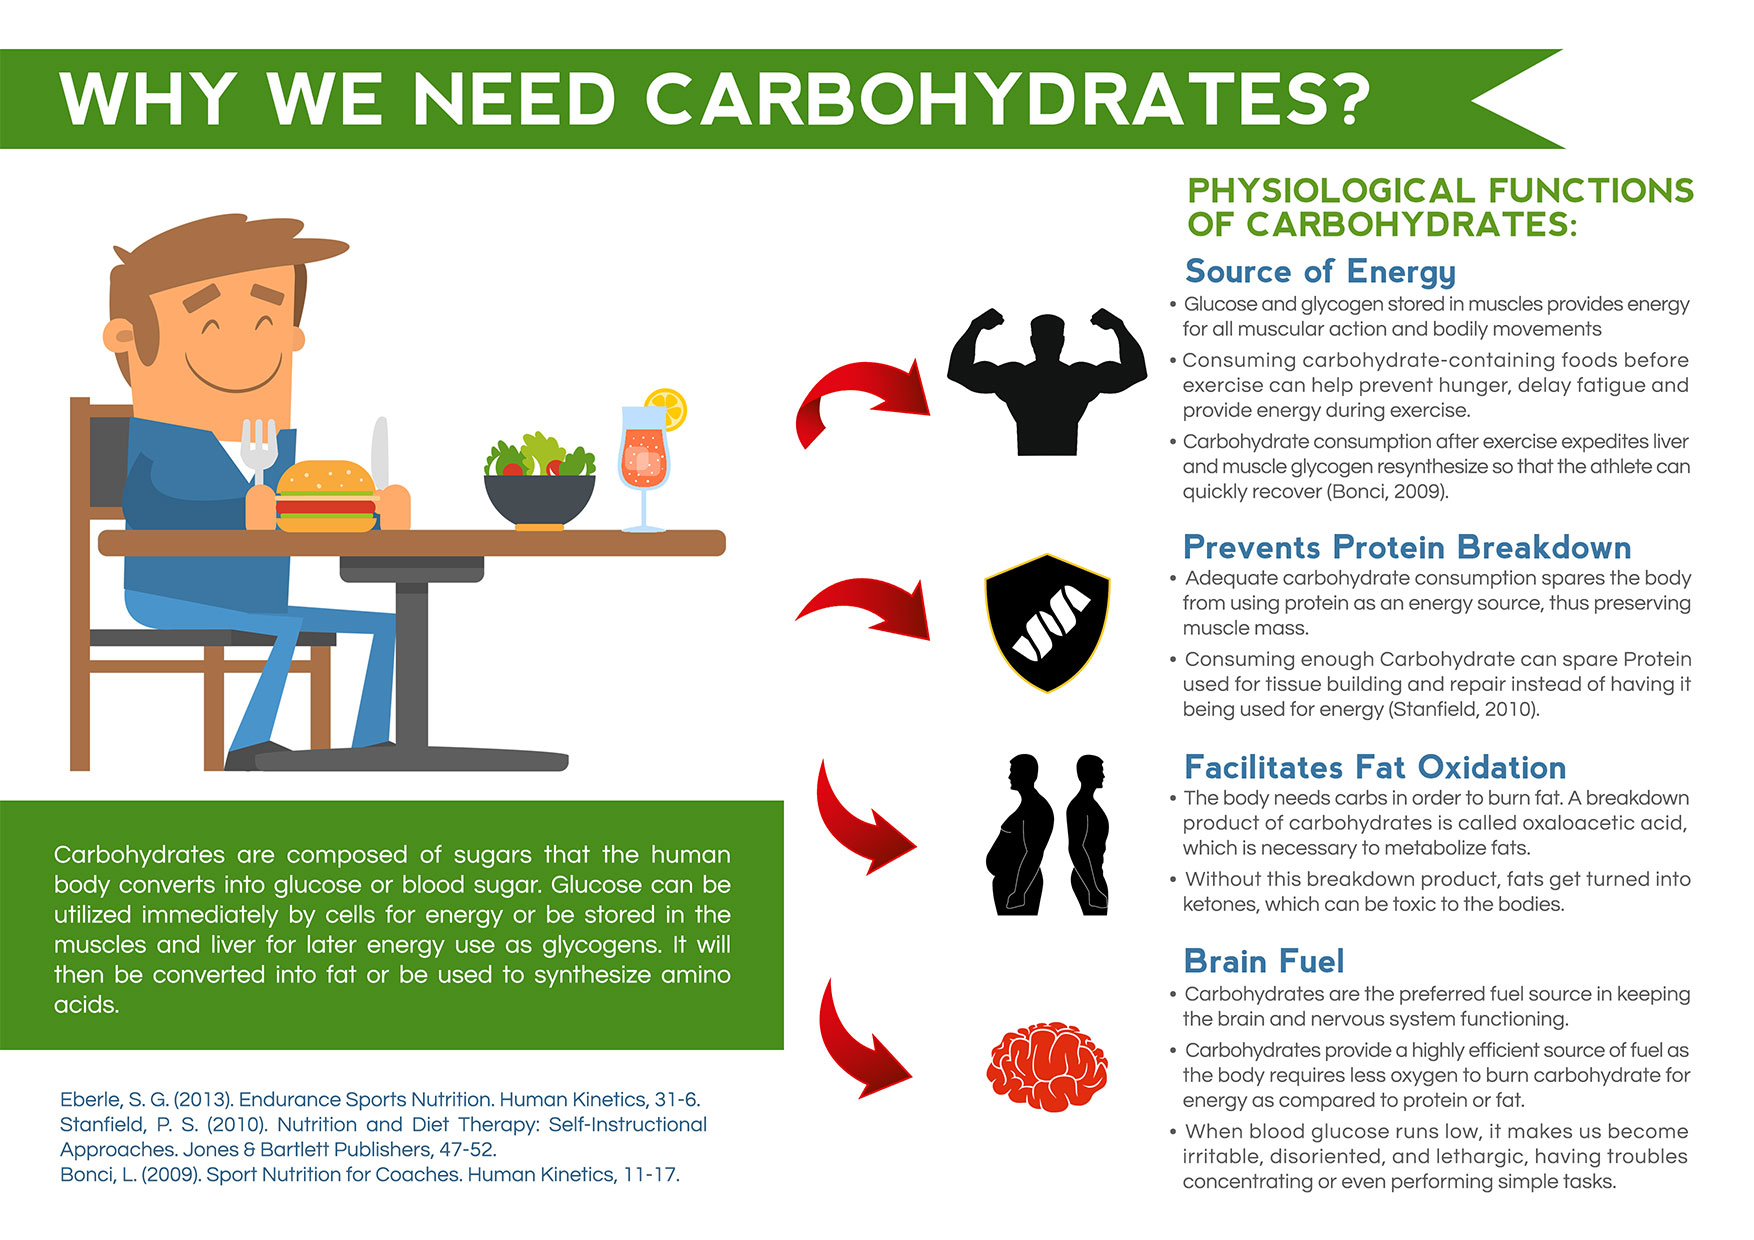 Why do people need people. Углеводы инфографика. Proteins fats carbohydrates. Fat Protein carbohydrates infographics. The Art and Science of Low carbohydrate Living книга.